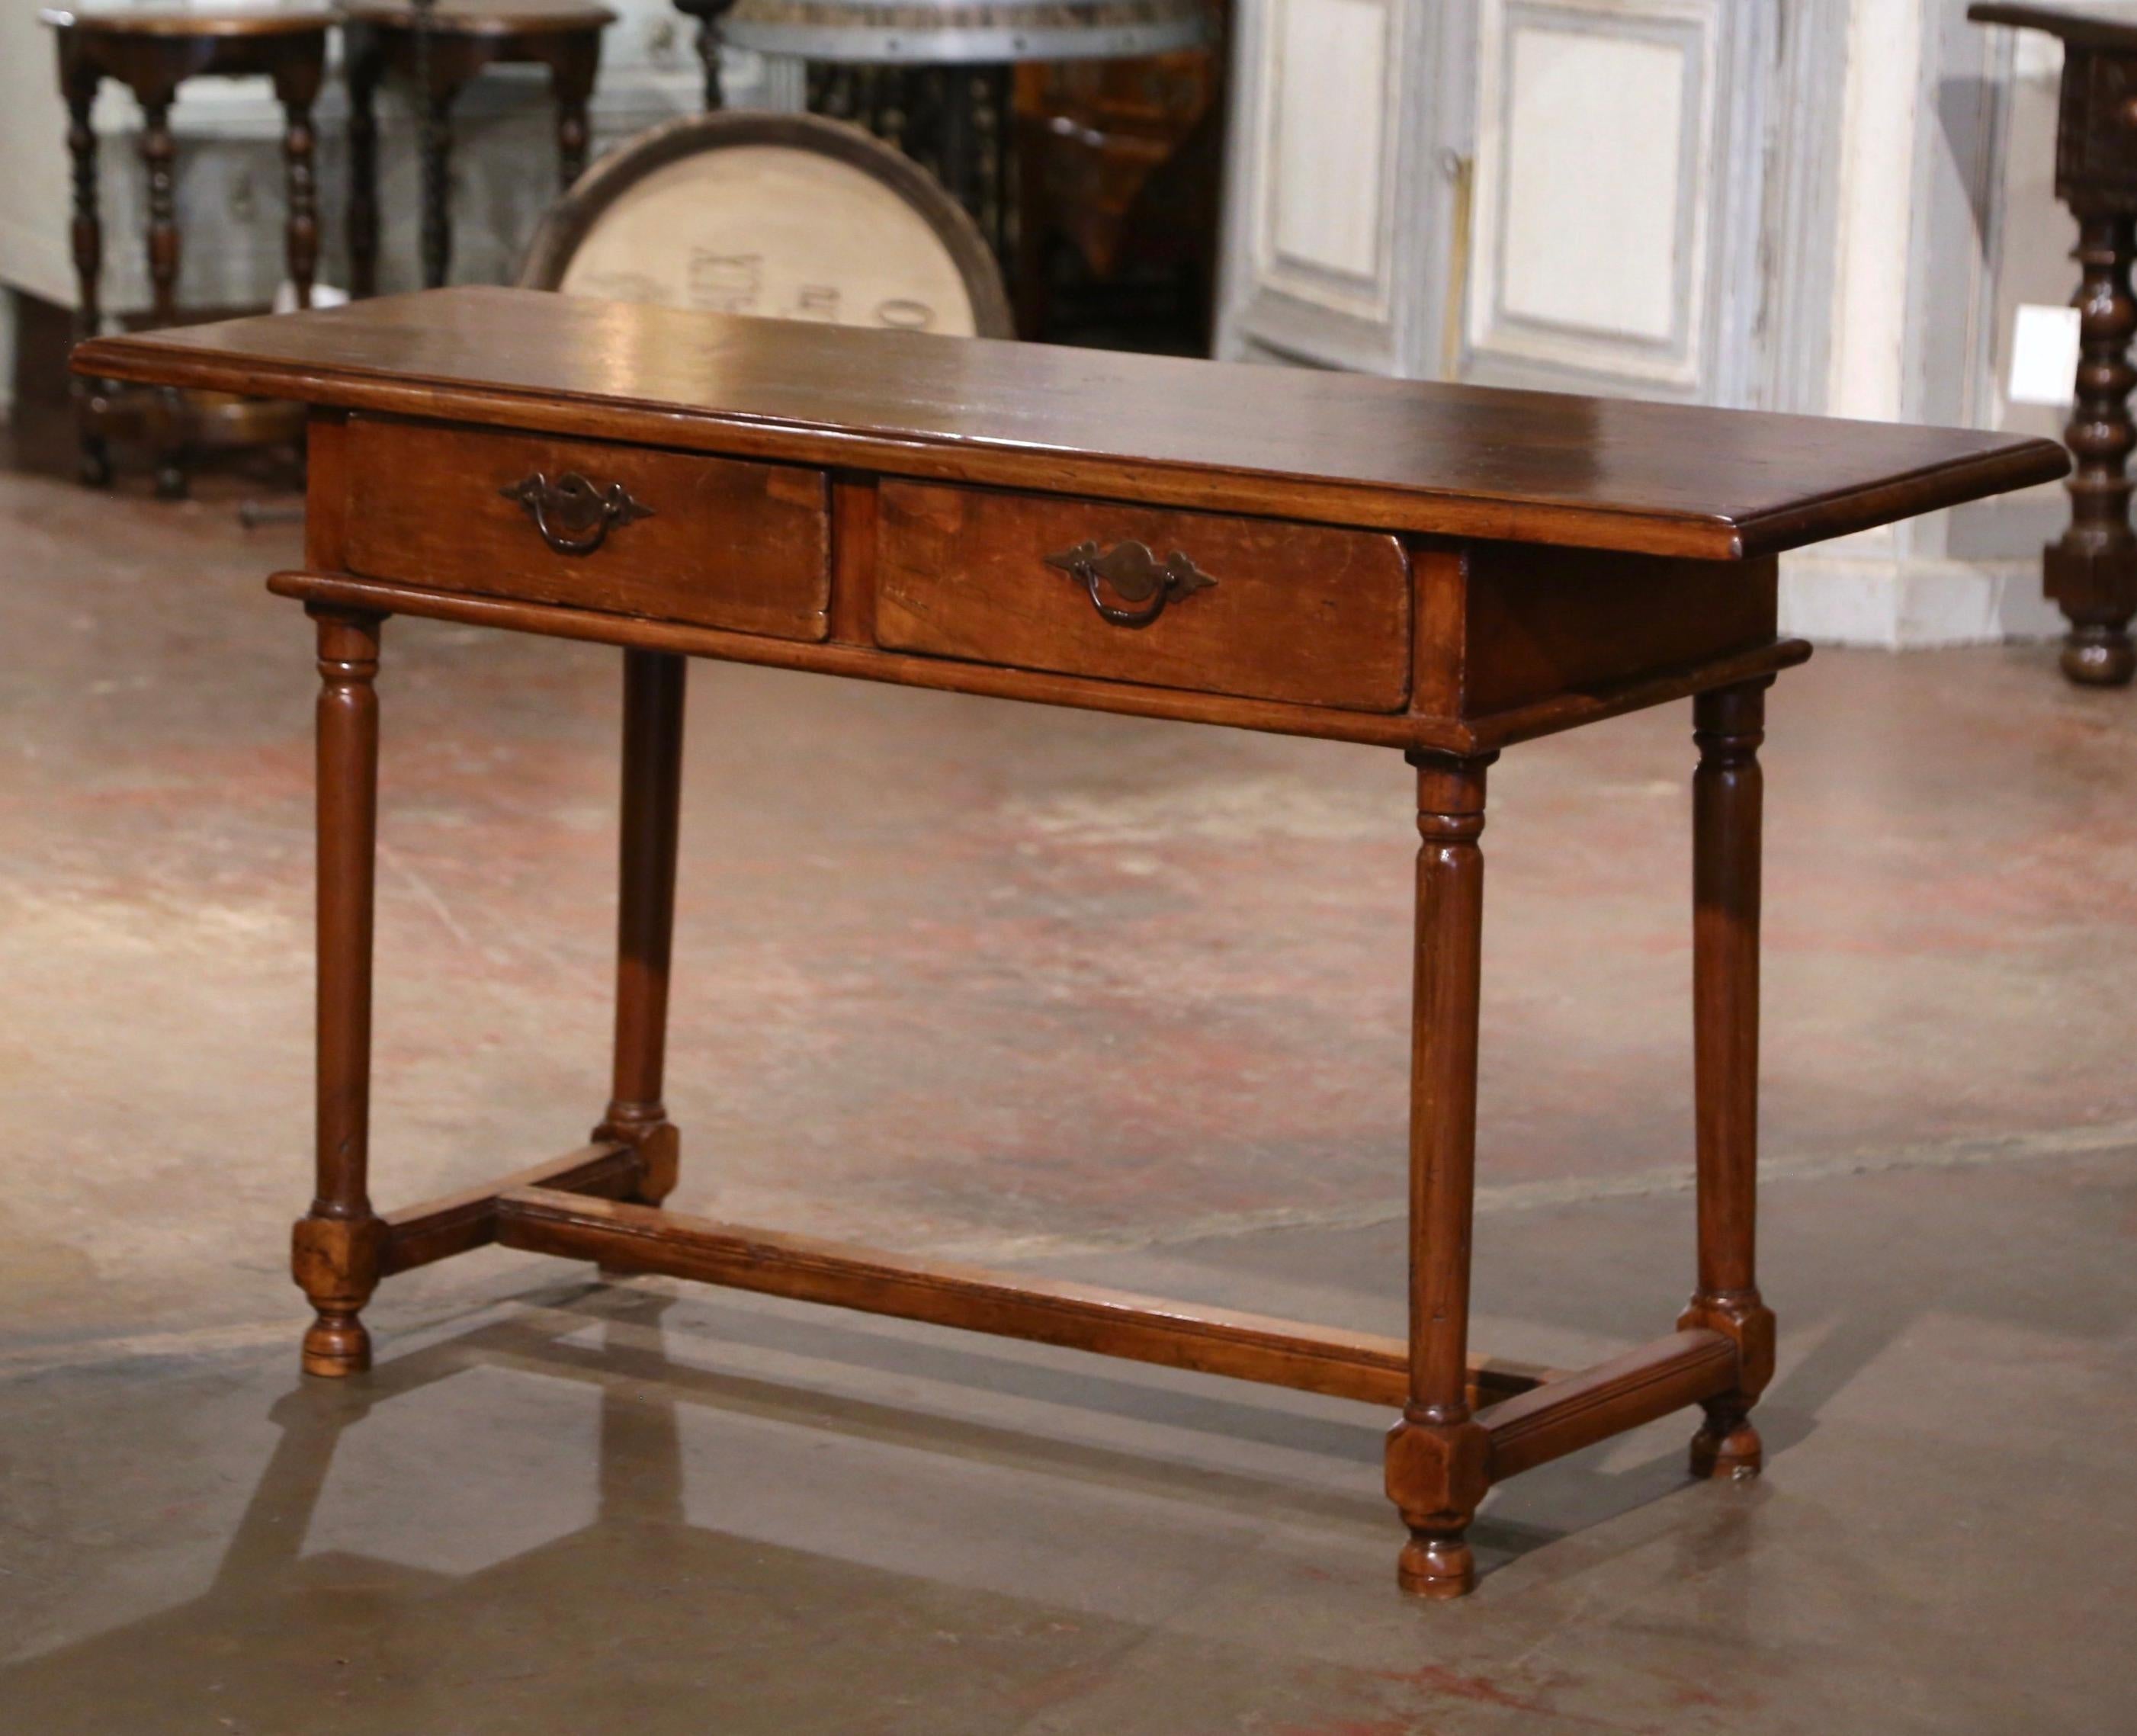 Mid-19th Century French Empire Walnut Console Table with Drawers For Sale 2